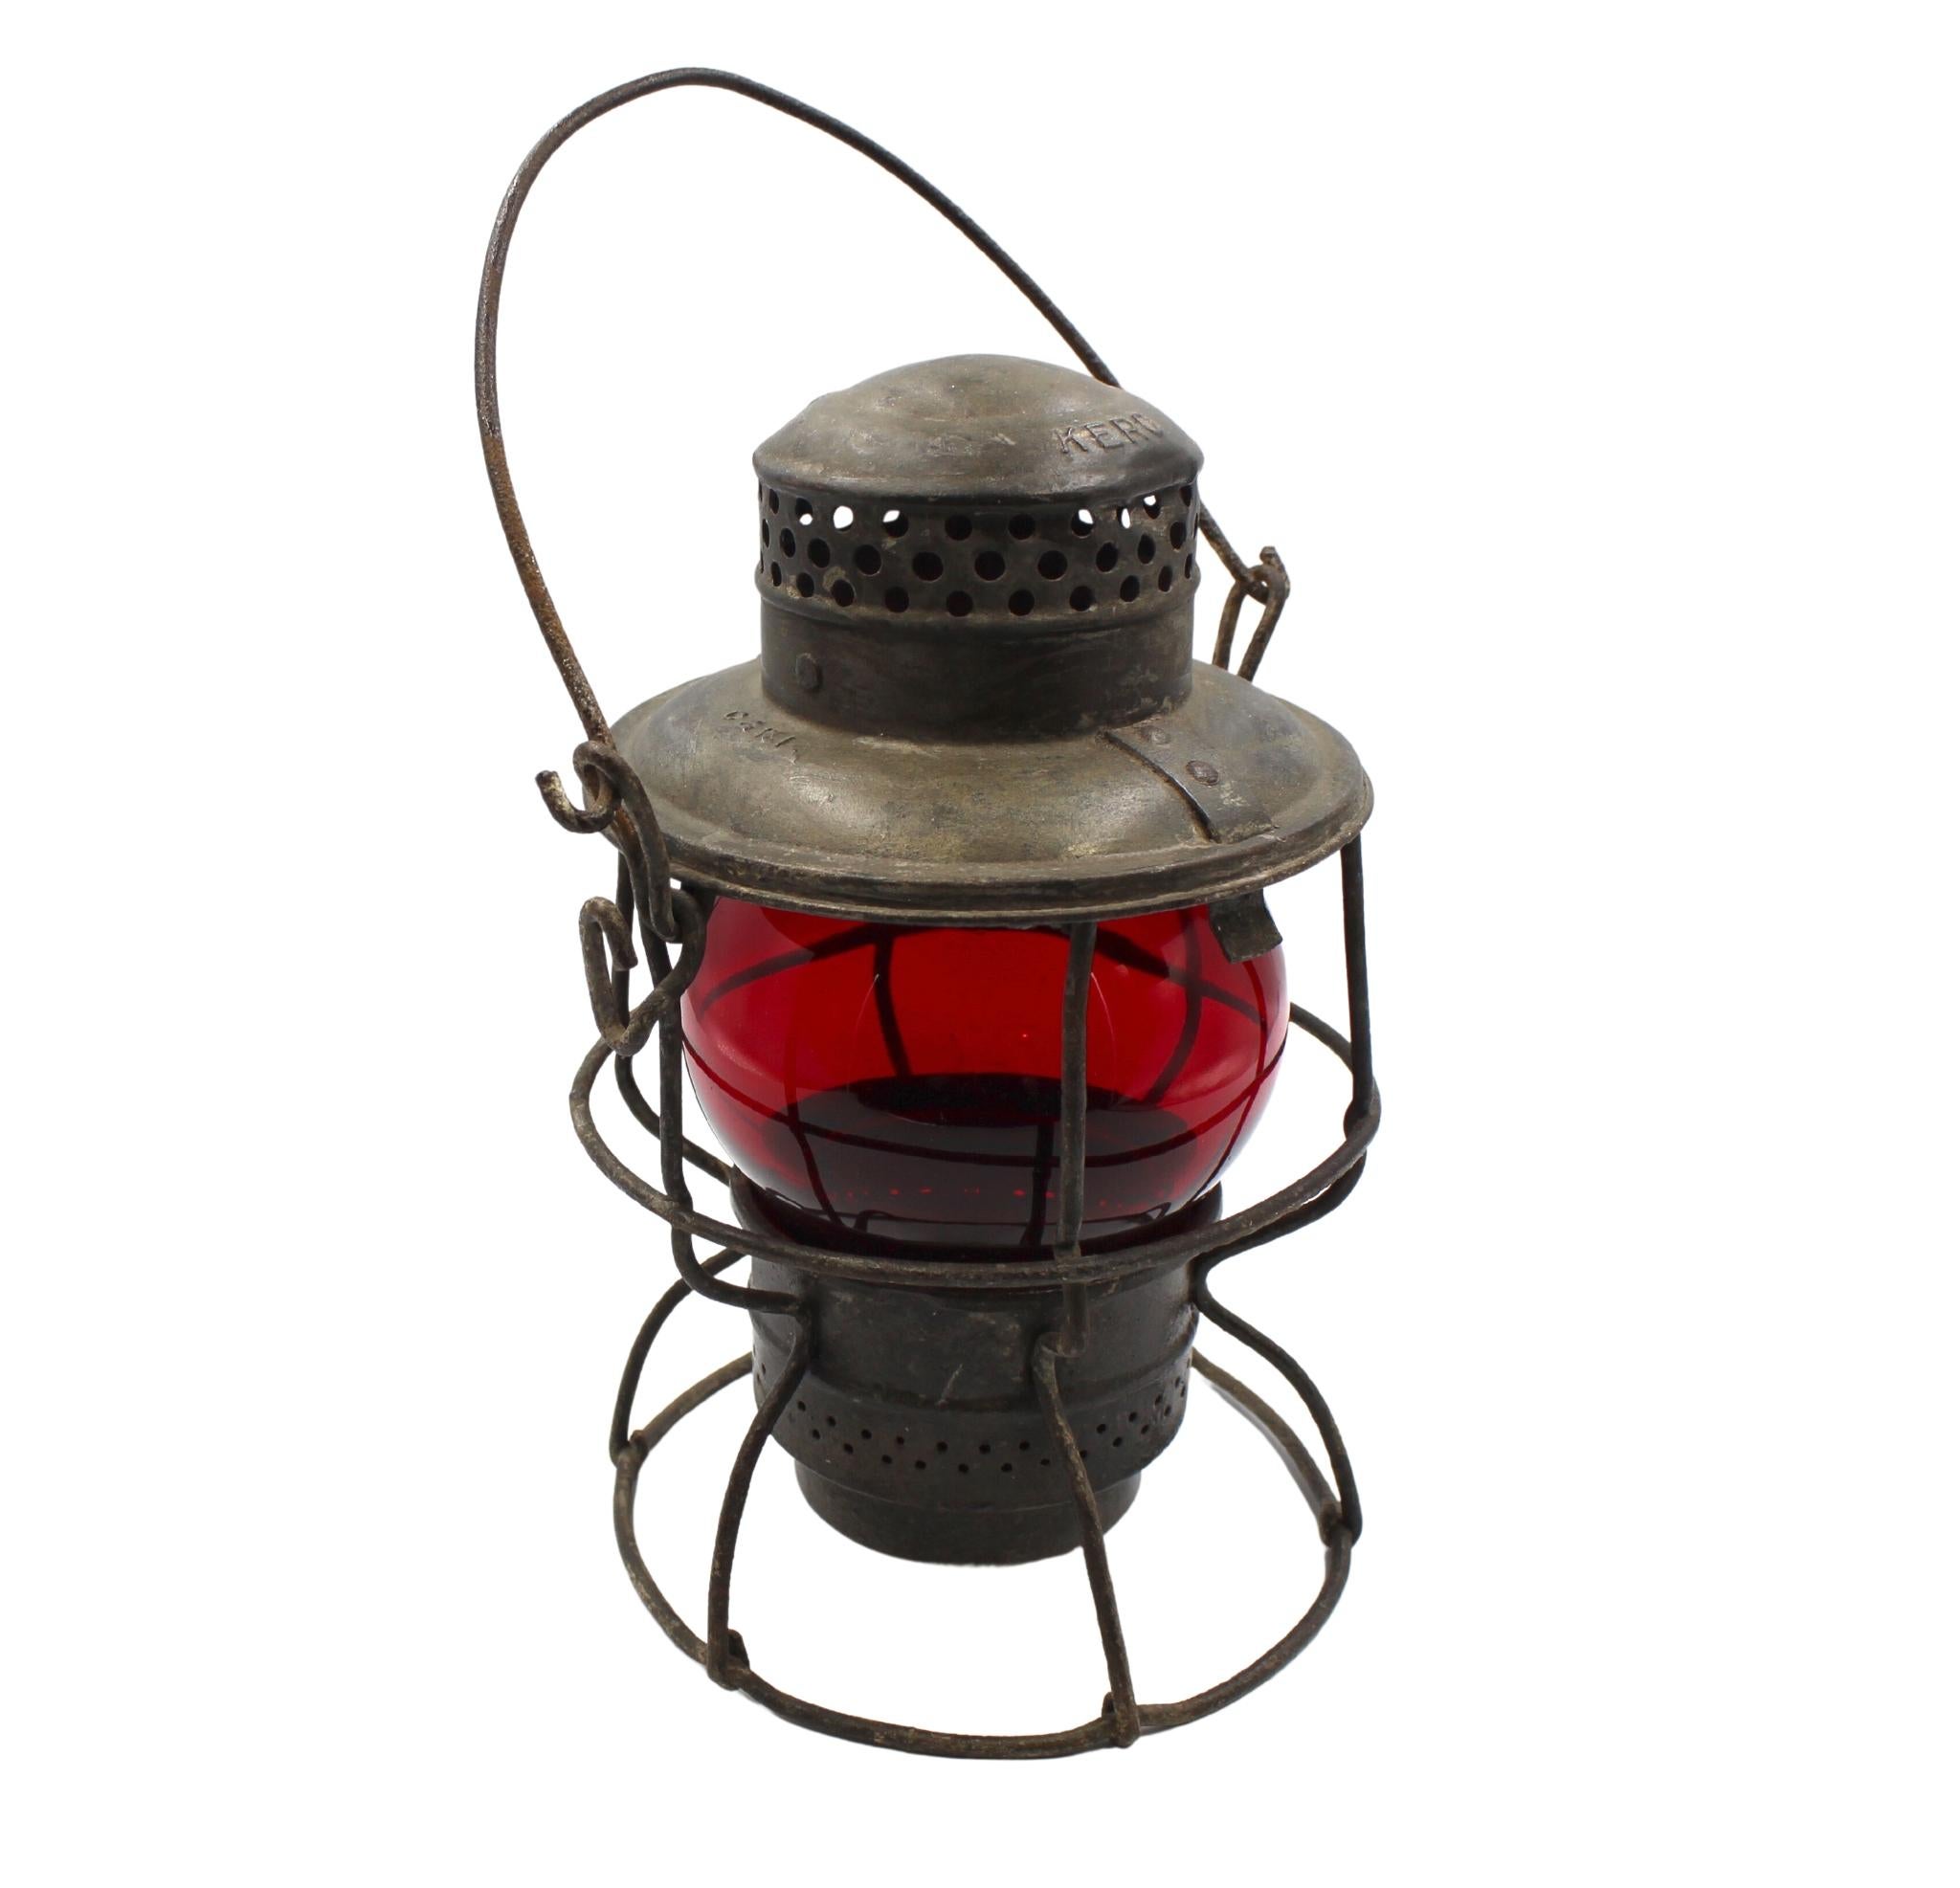 Presented is a vintage Adlake railroad kerosene lantern, with a red glass globe and wire caging. The lantern was manufactured by the Adams & Westlake Company of Chicago, Illinois, sometime between 1945-1965. It was originally used on the Chicago and